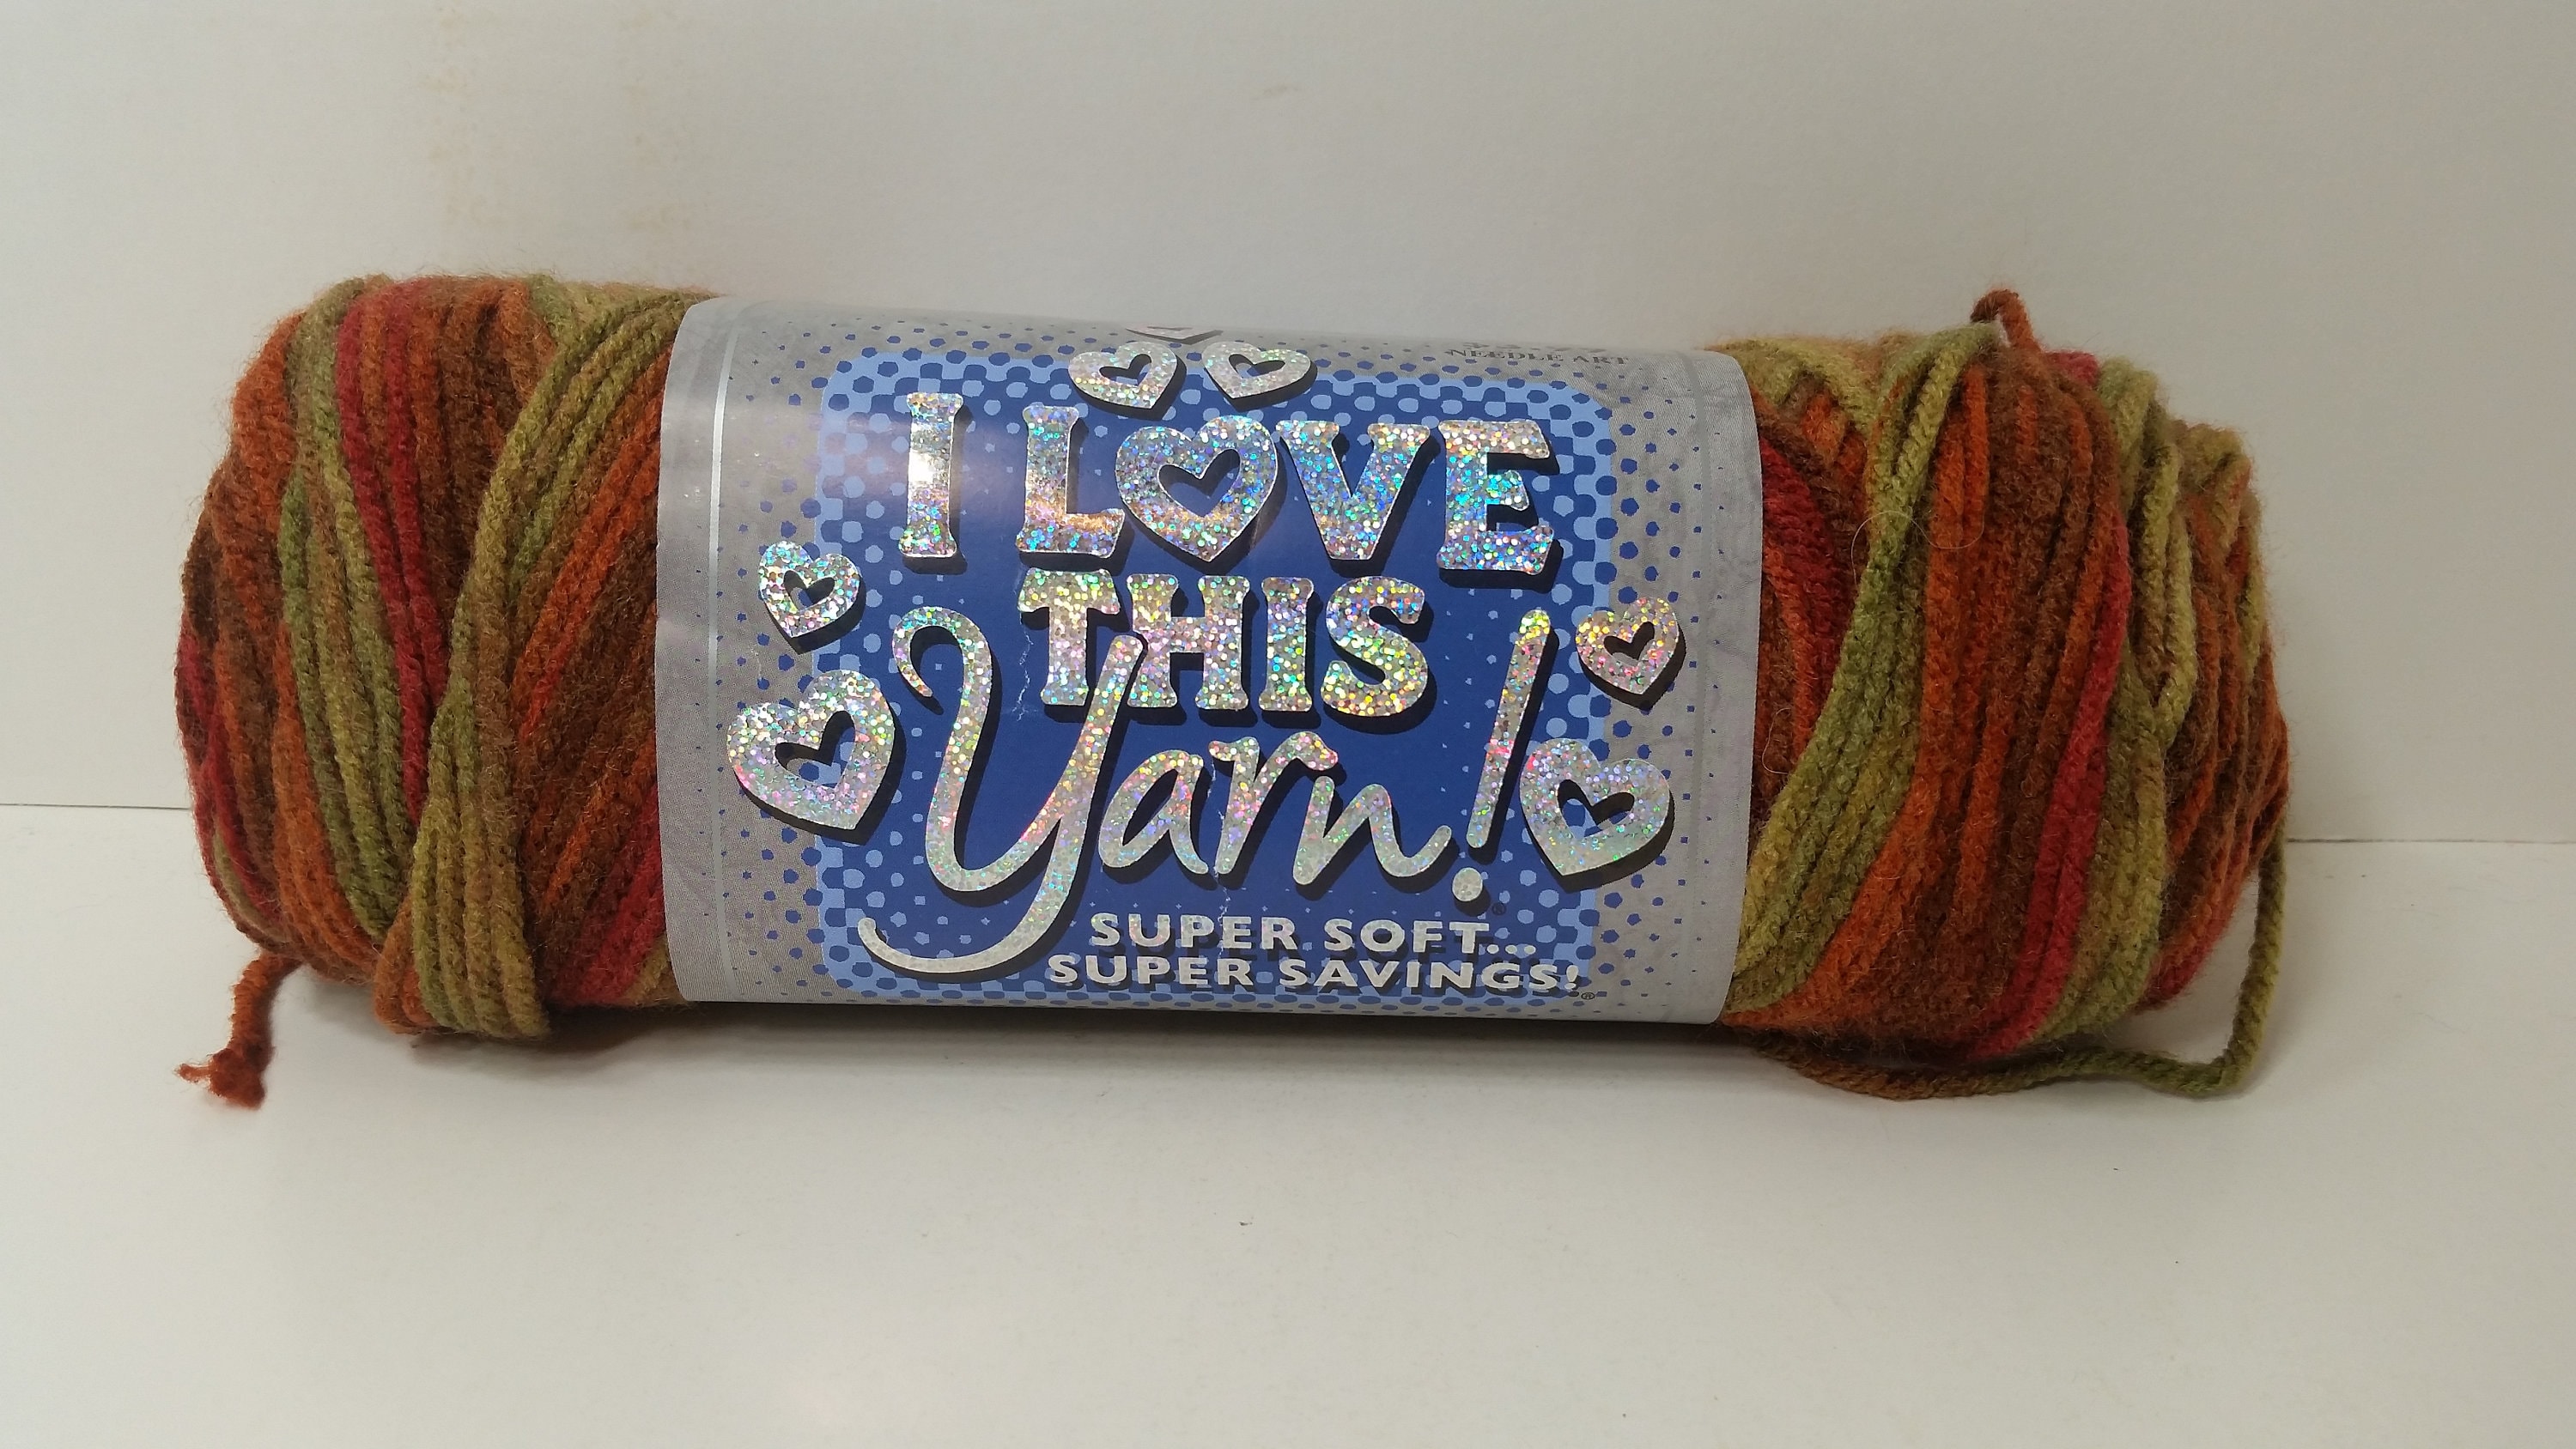 Hobby Lobby, Office, Skein I Love This Yarn Super Soft Yarn Color Forest  18 355 Yds198gms